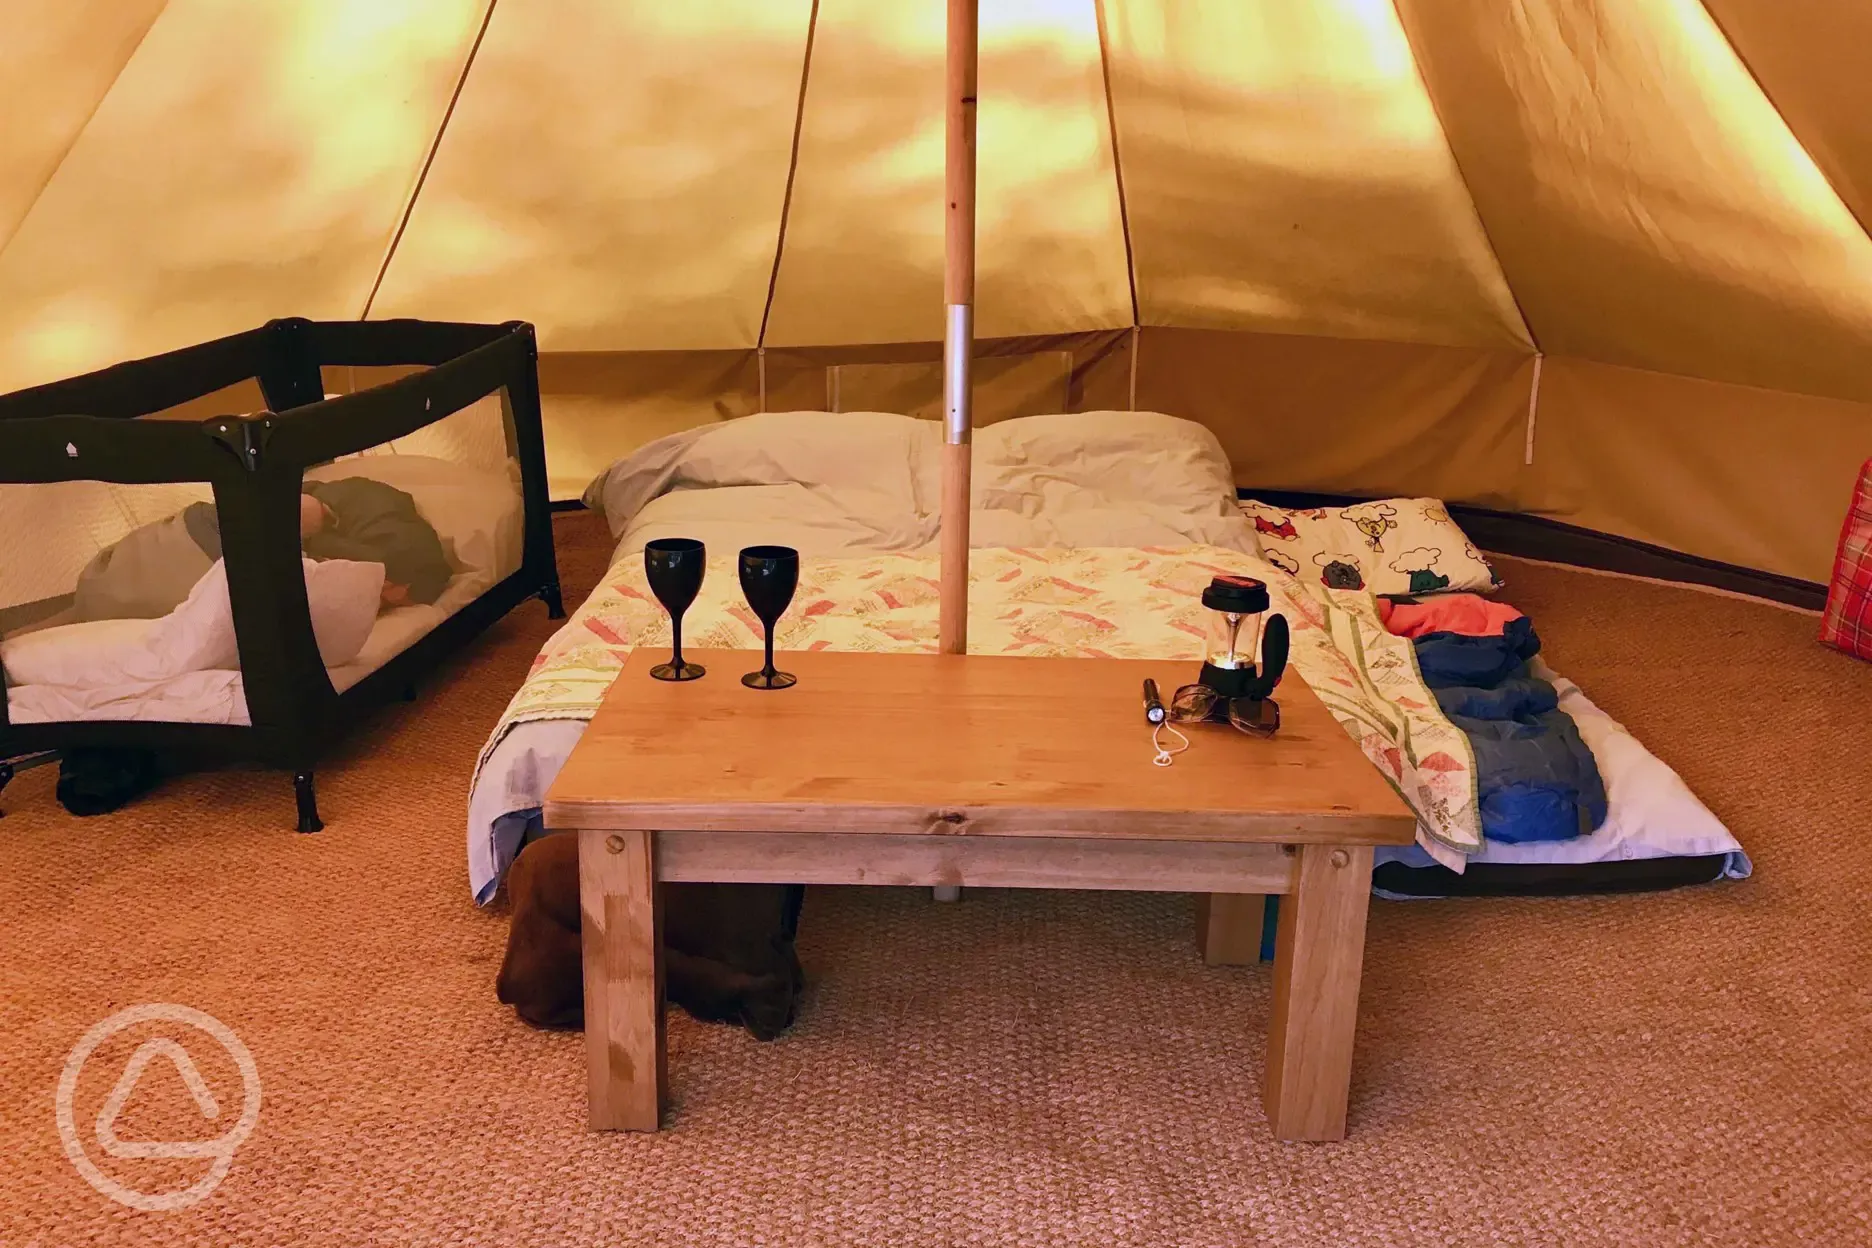 Wild glamping bell tent interior